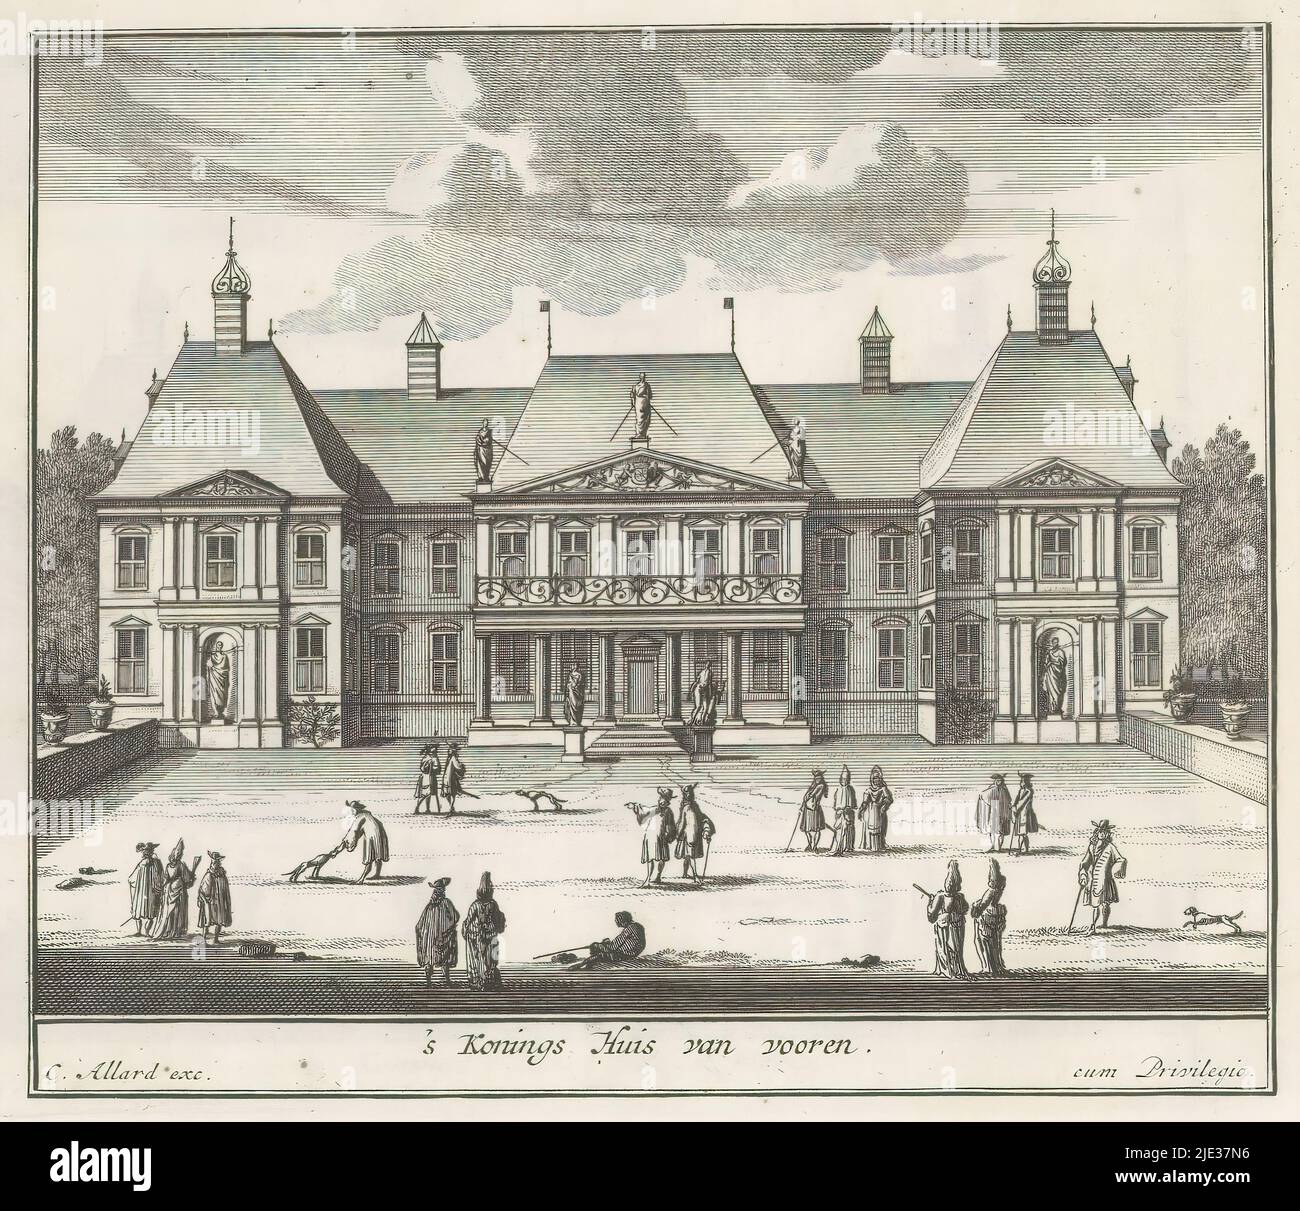 Honselaarsdijk Palace from the front, King's House from the front (title on object), Hollands Lustpark besluitende zyn Britannische majesteits hof-gebouw tot Honslaardyk (series title), The front of Honselaarsdijk Palace with groups of pedestrians on the square in front of the palace. Print is part of an album., print maker: Carel Allard, (attributed to), publisher: Carel Allard, (mentioned on object), Staten van Holland en West-Friesland, (mentioned on object), Amsterdam, 1689 - 1702, paper, etching, height 170 mm × width 205 mm Stock Photo